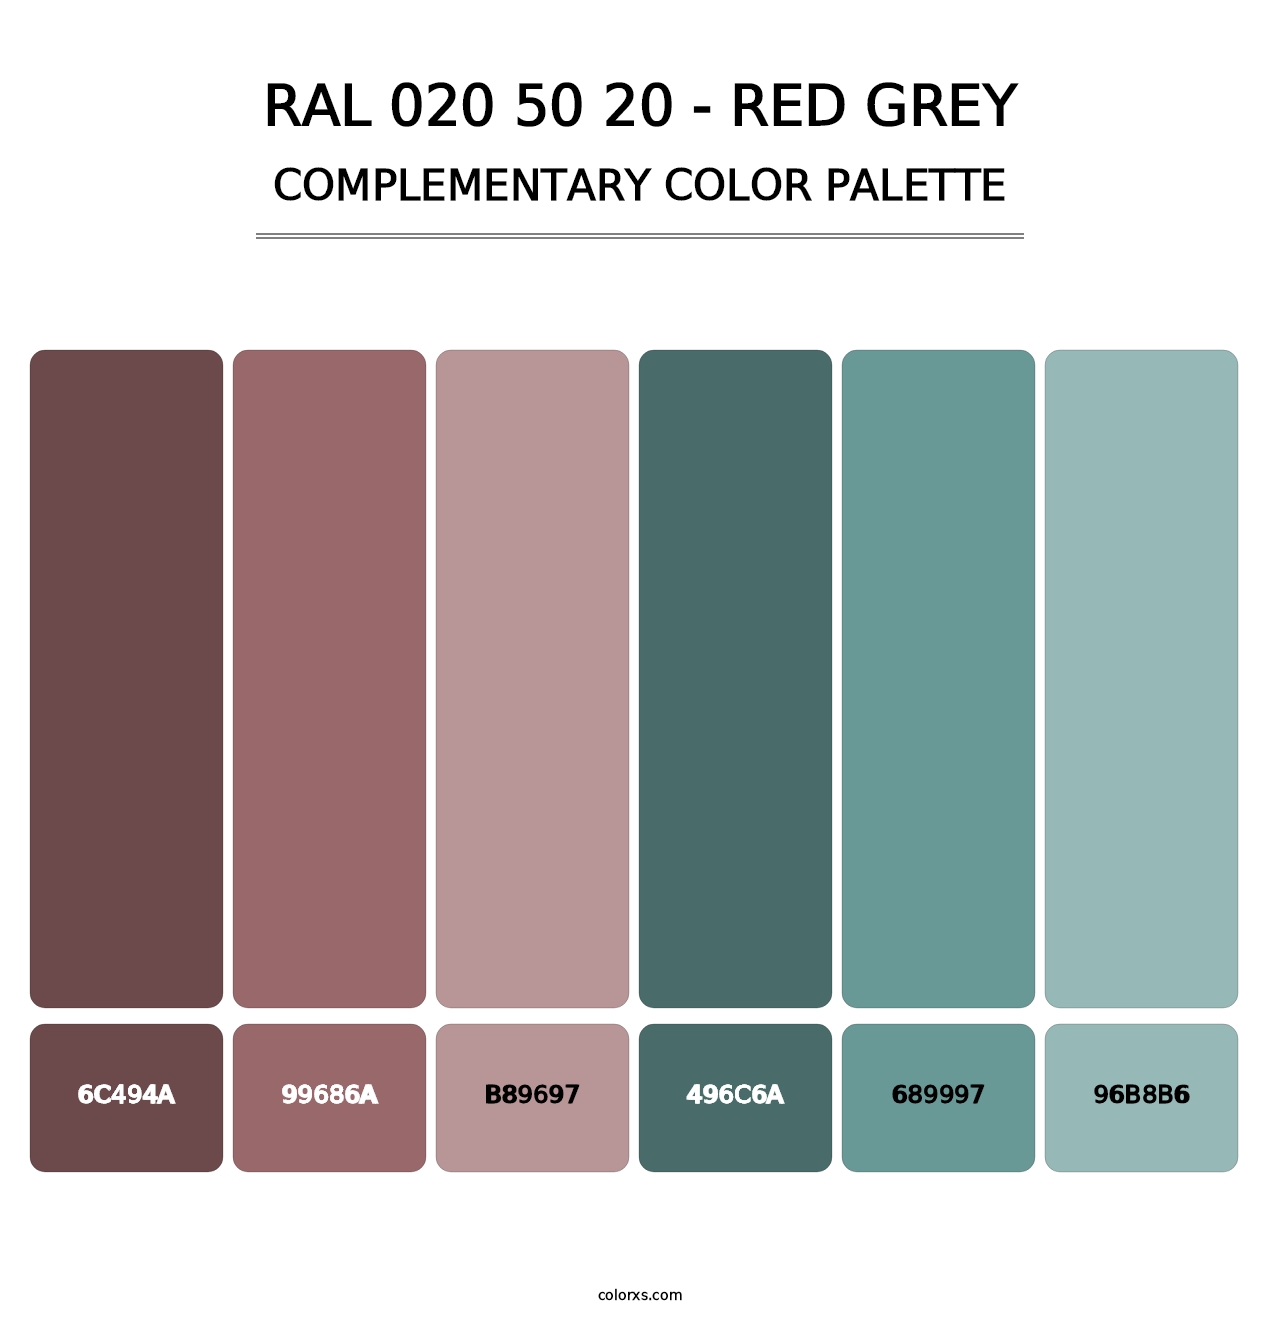 RAL 020 50 20 - Red Grey - Complementary Color Palette